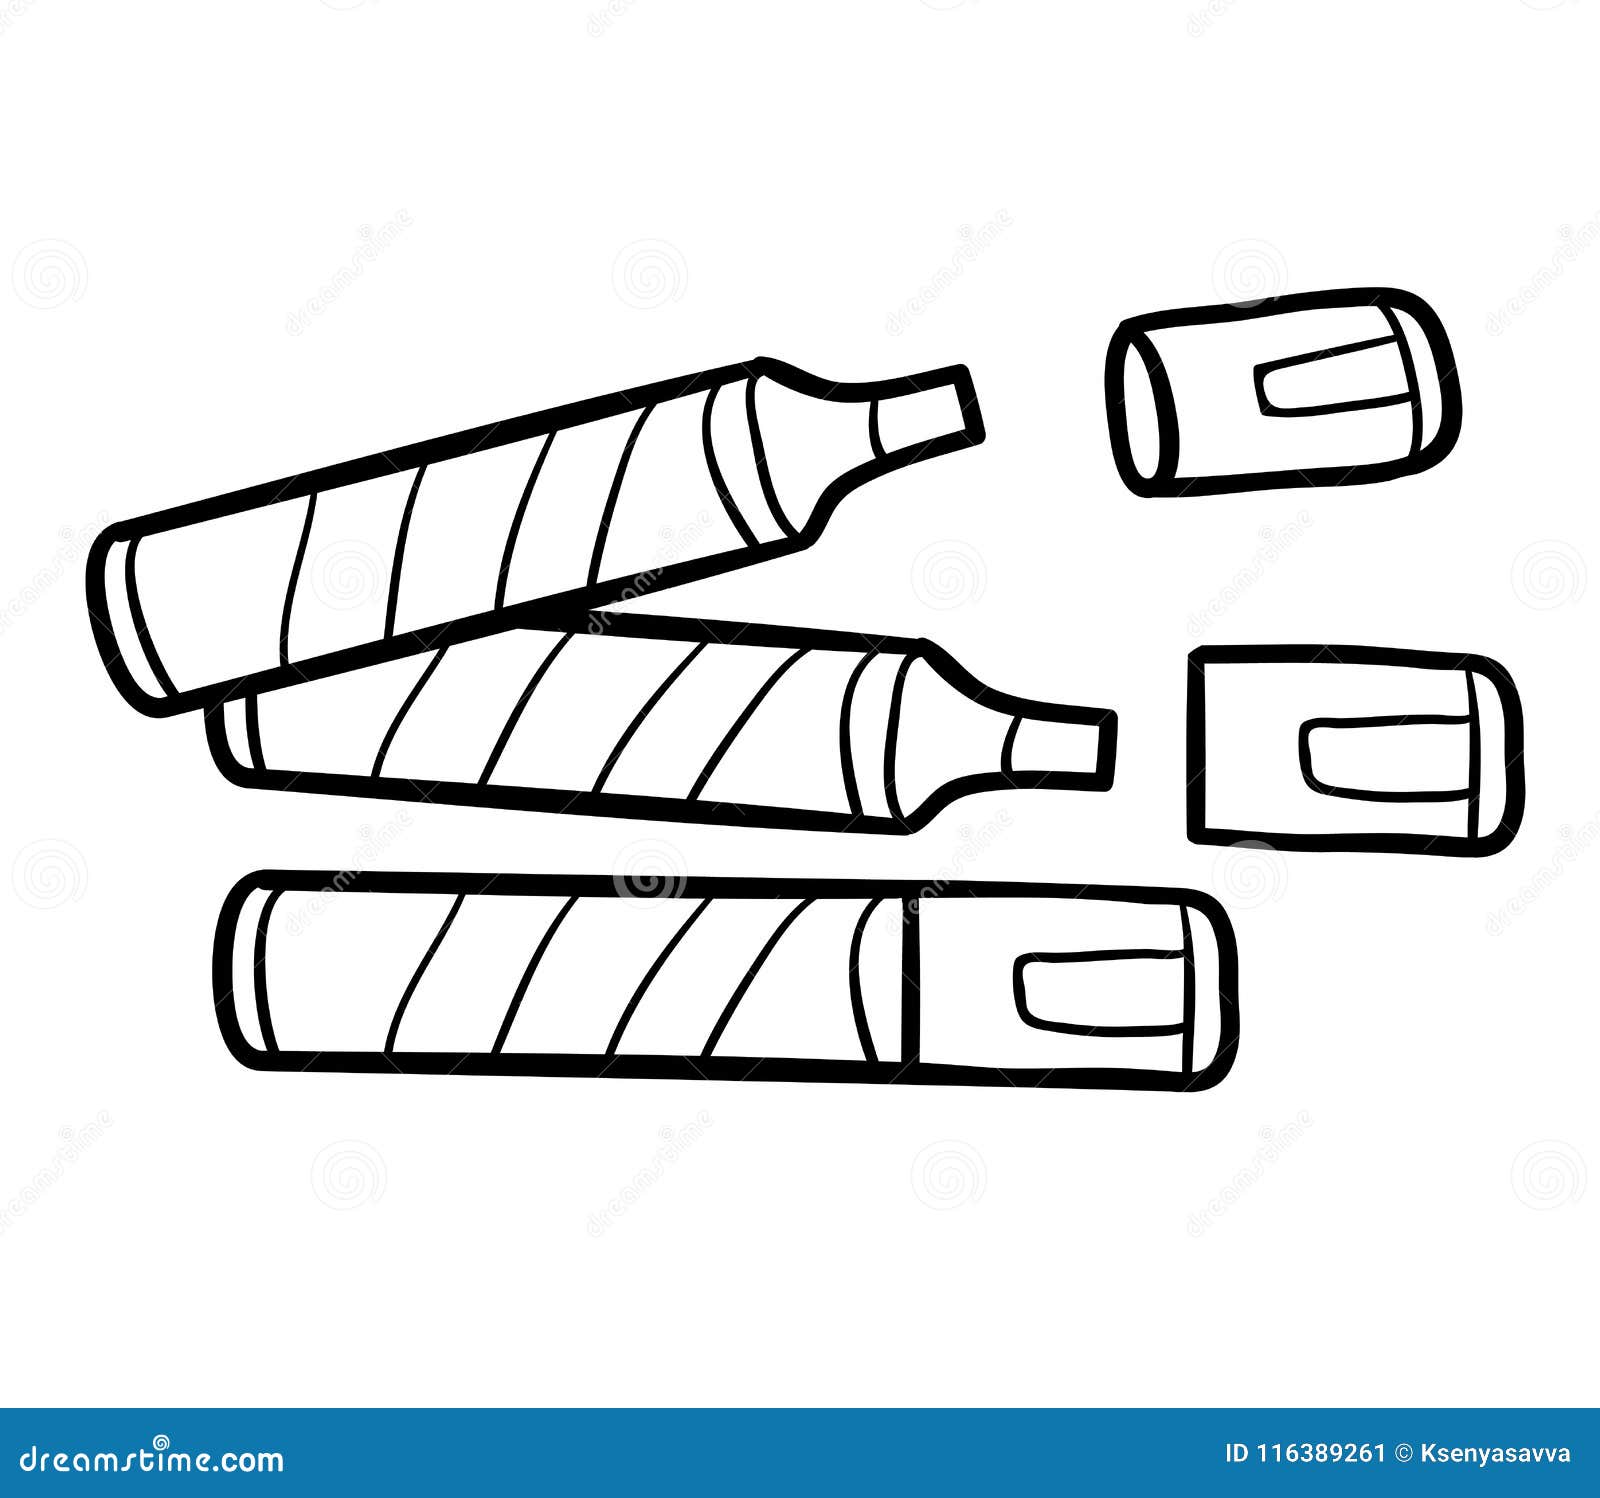 Coloring Book, Set of Markers Stock Vector - Illustration of